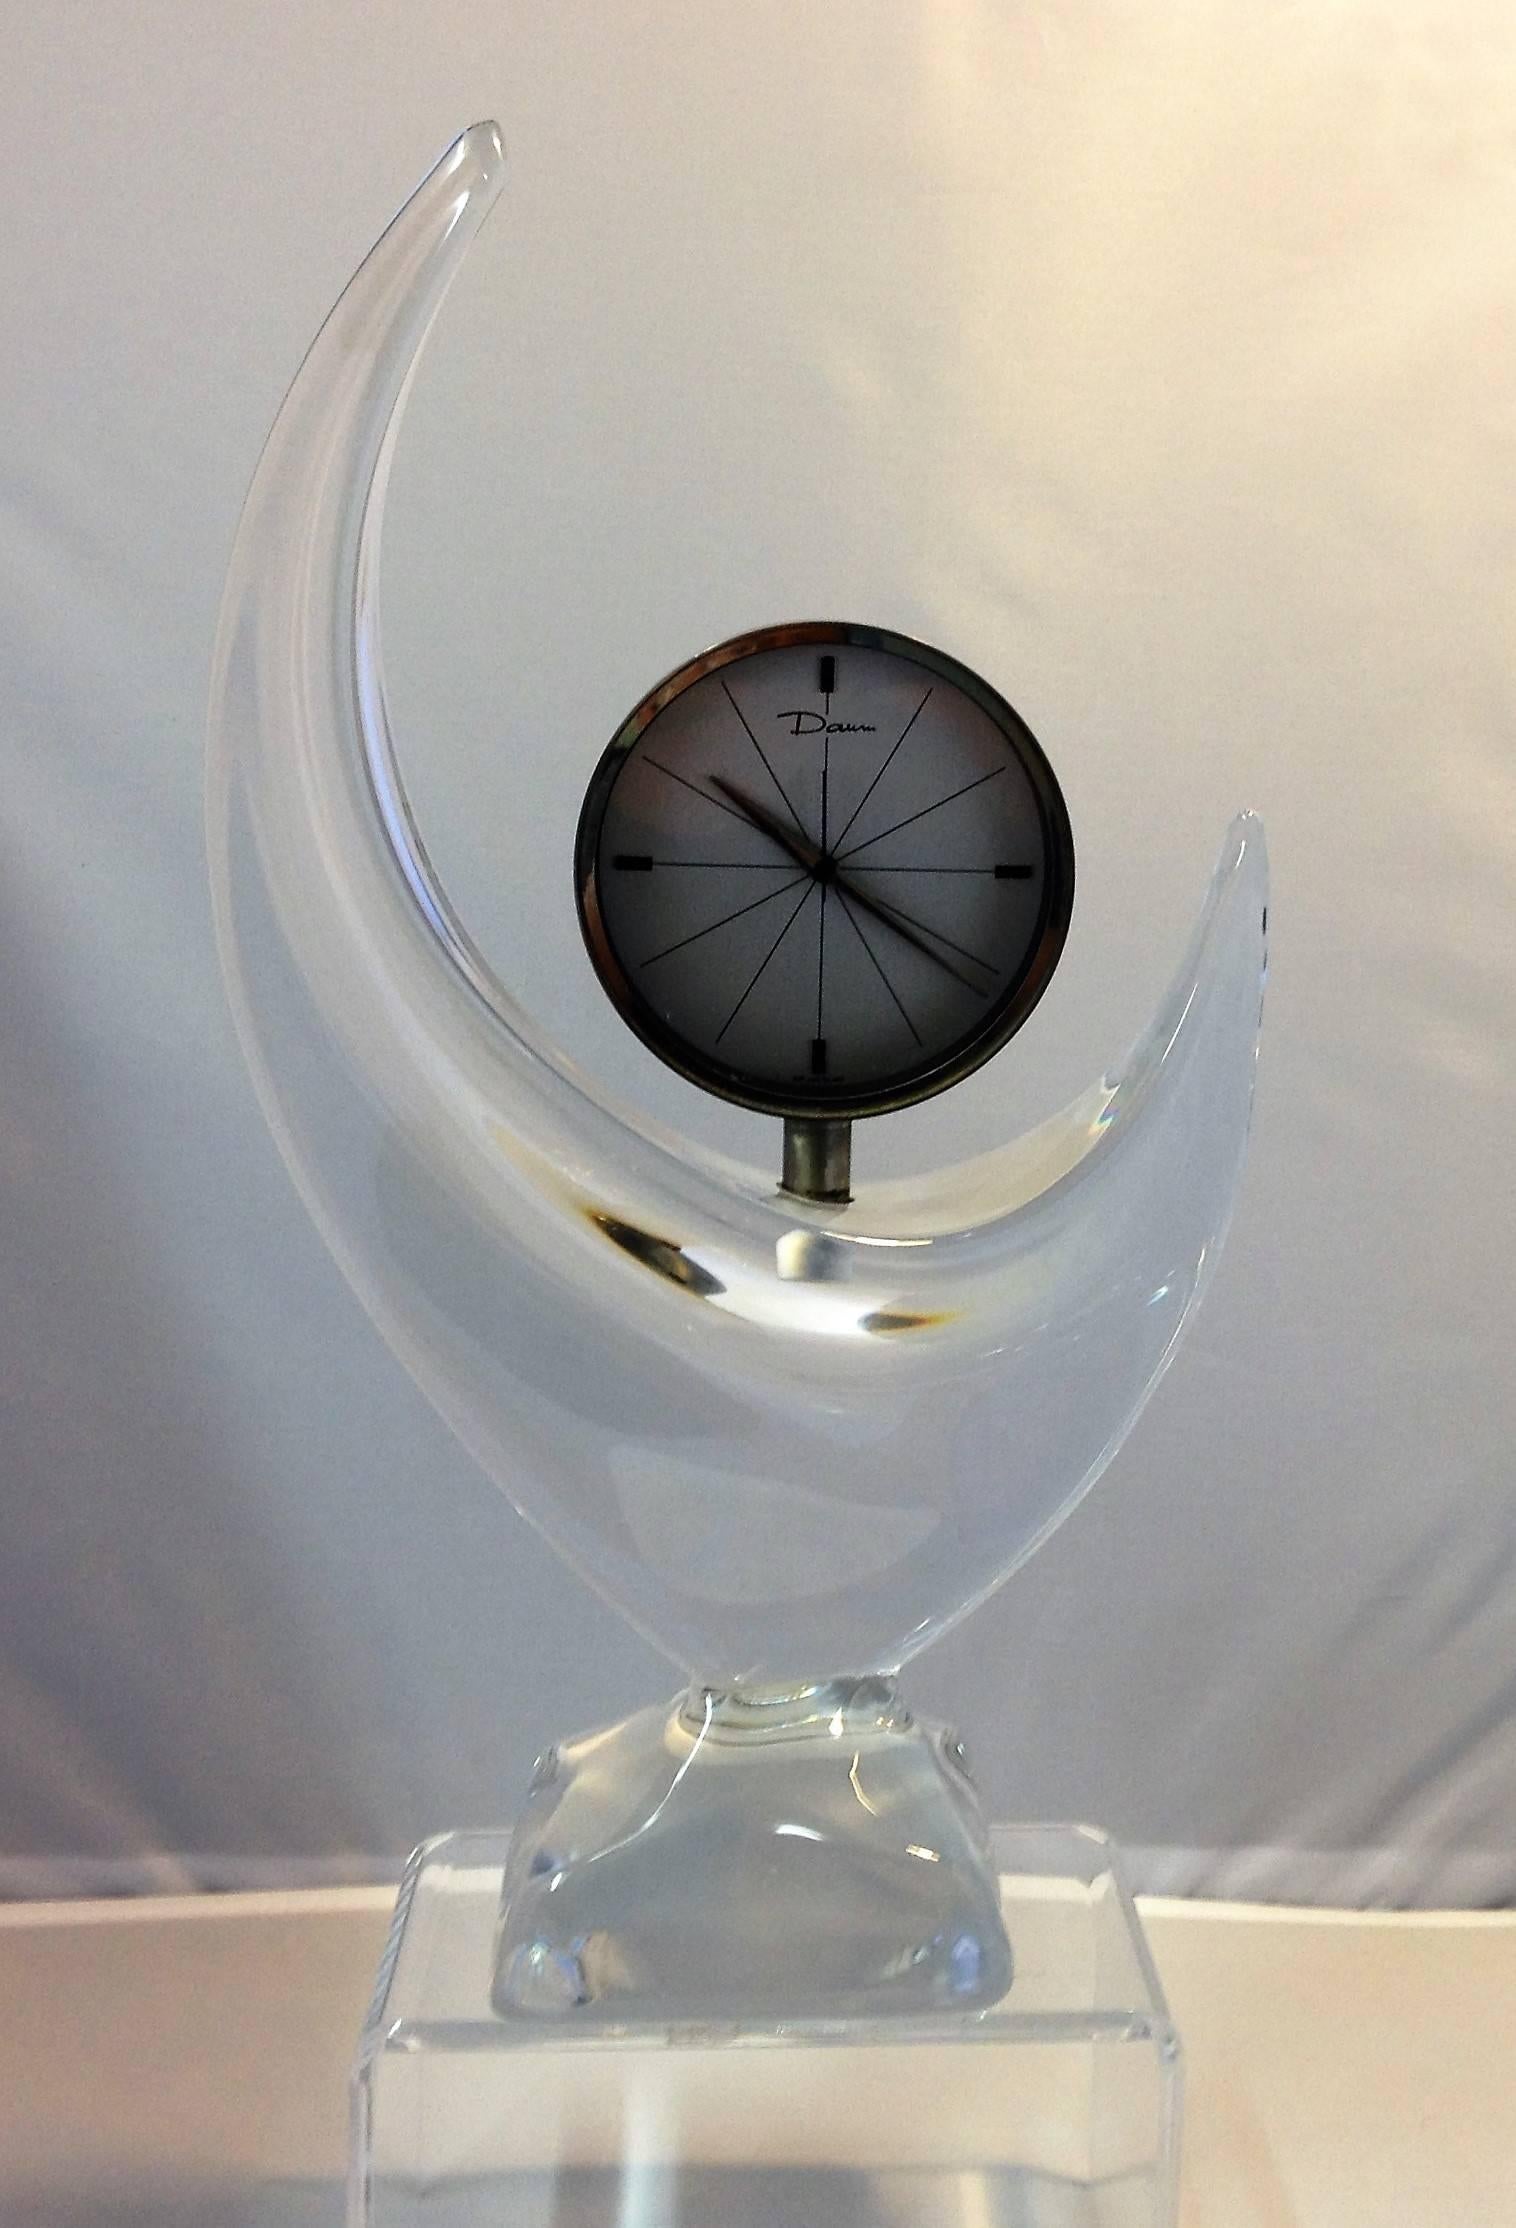 Striking crescent moon shaped, crystal mantel clock by Daum. This rare Mid-Century piece is in excellent working condition and makes an elegant statement in any room.